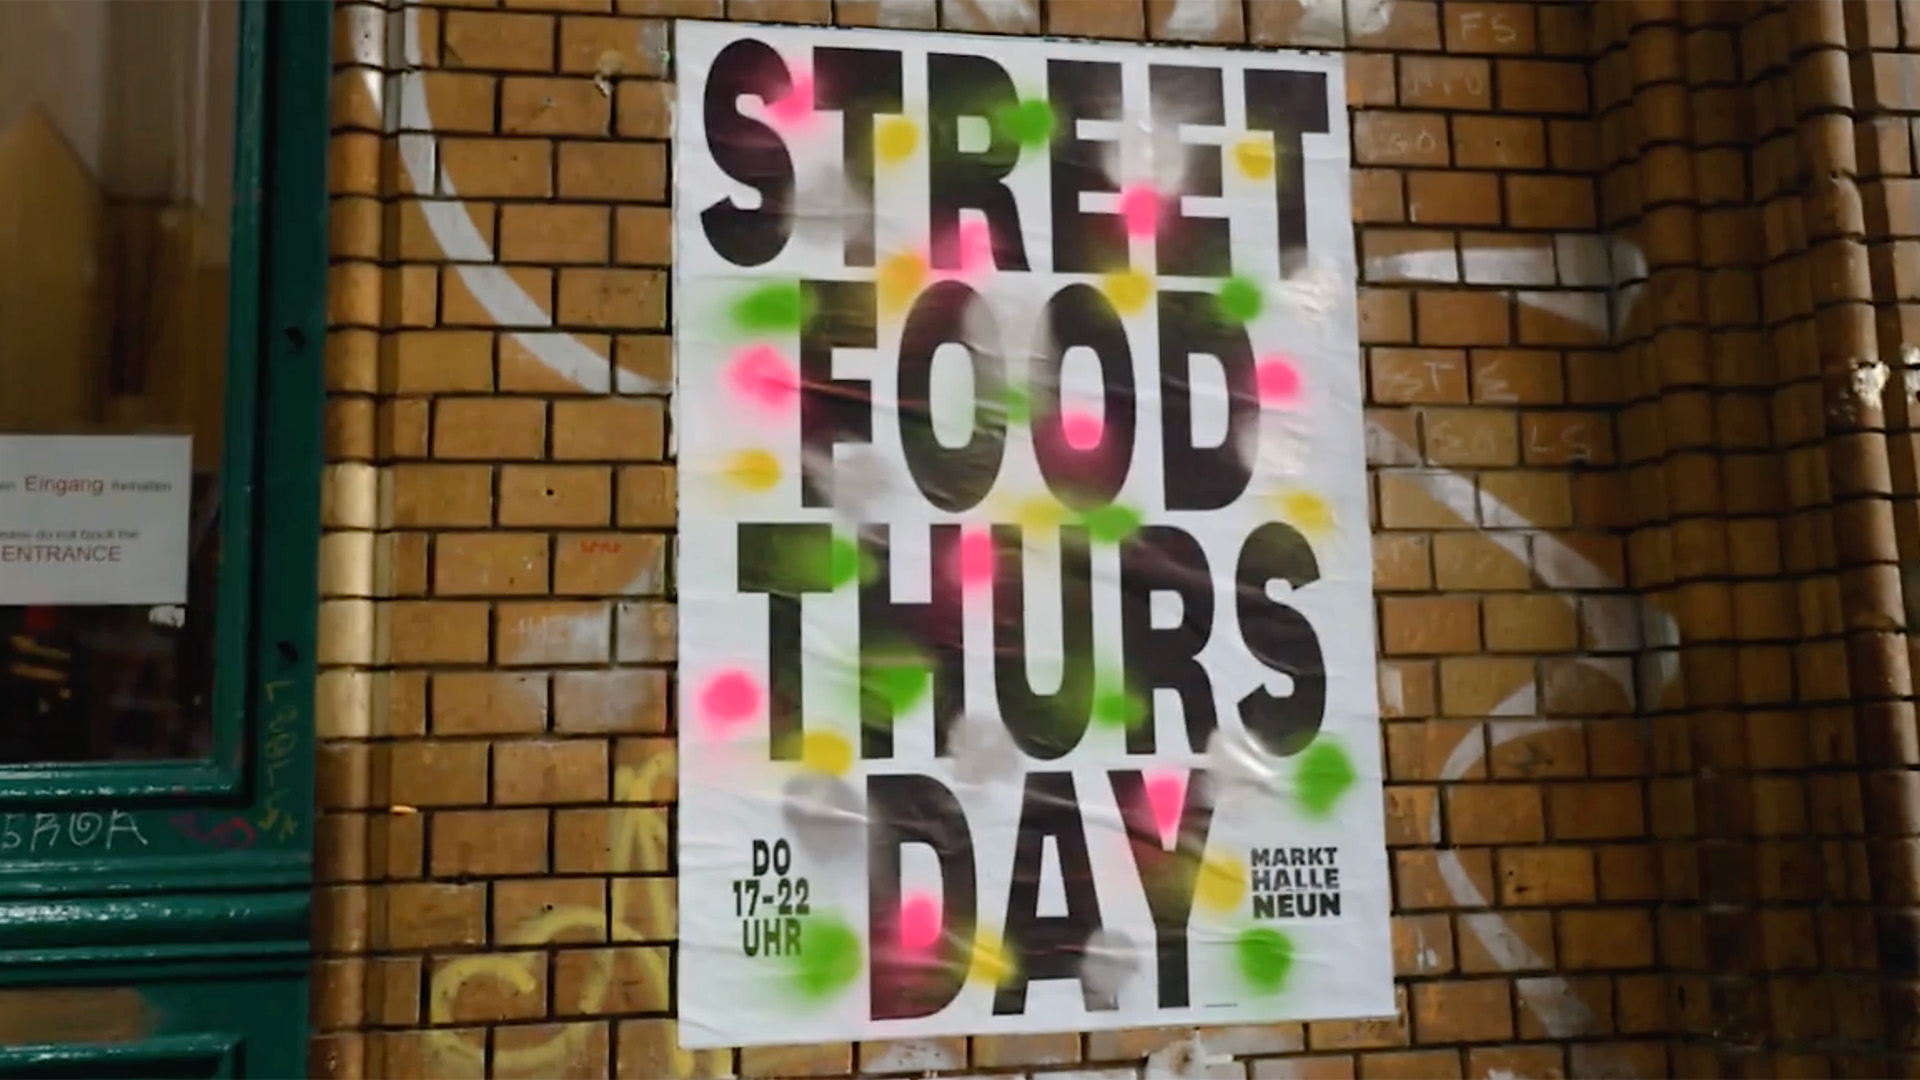 sign for street food tours